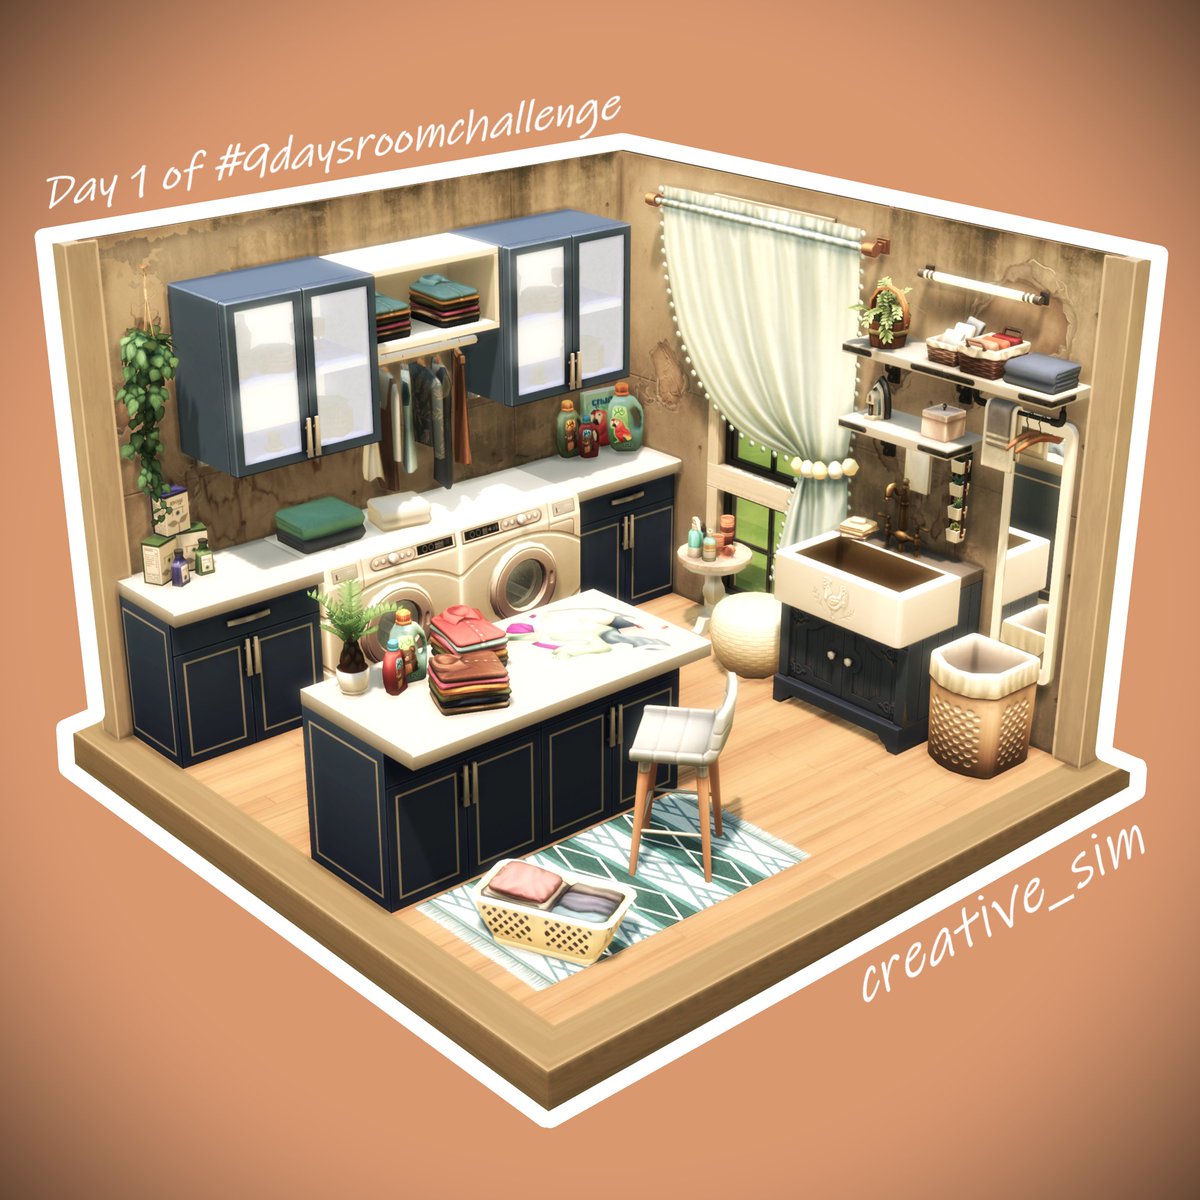 Sul sul🌼... this is the first Day of the awesome #9daysroomchallenge by the great @axiisims. 💝 I'd build a blue Laundry Room. Hope u like it!🌼 🌺Download in my Gallery. EA ID #Juliee86 #sims #ts4 #sims4 #ShowUsYourBuilds